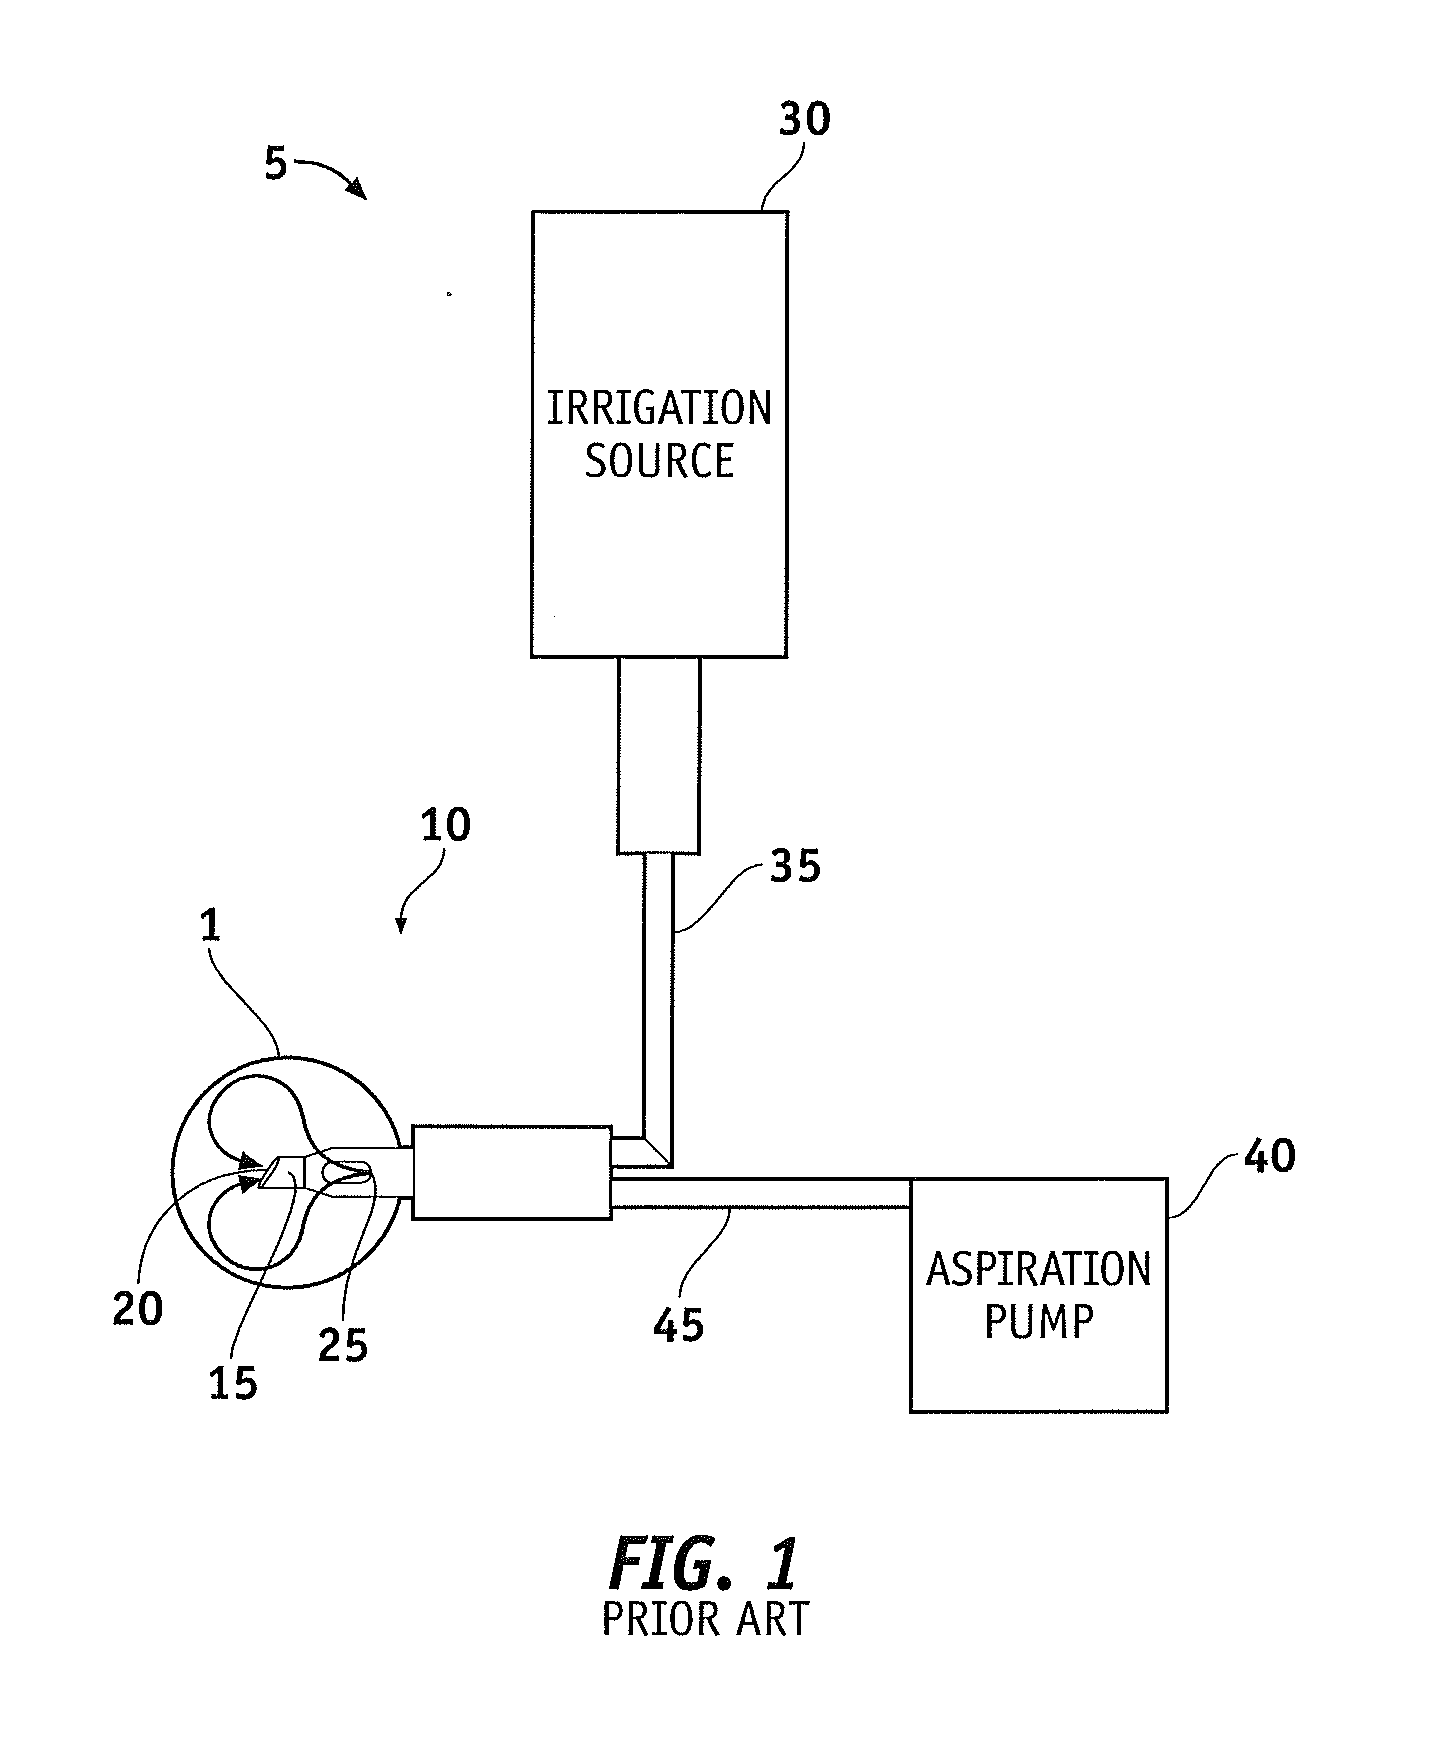 System and method for controlling a transverse phacoemulsification system using sensed data